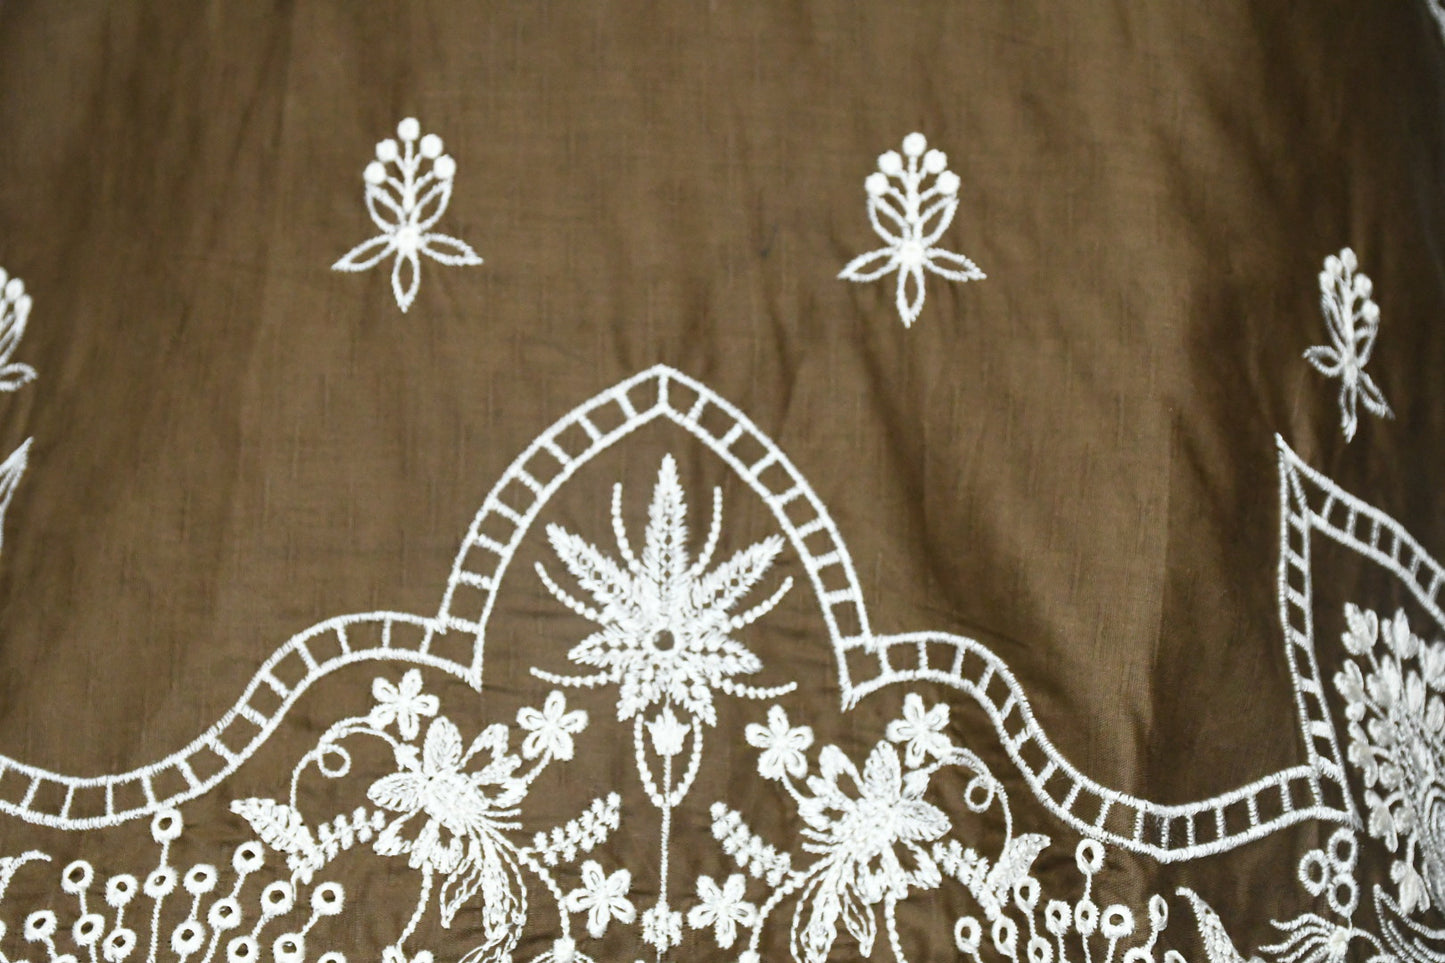 Brown Embroidered Shirt and Trouser